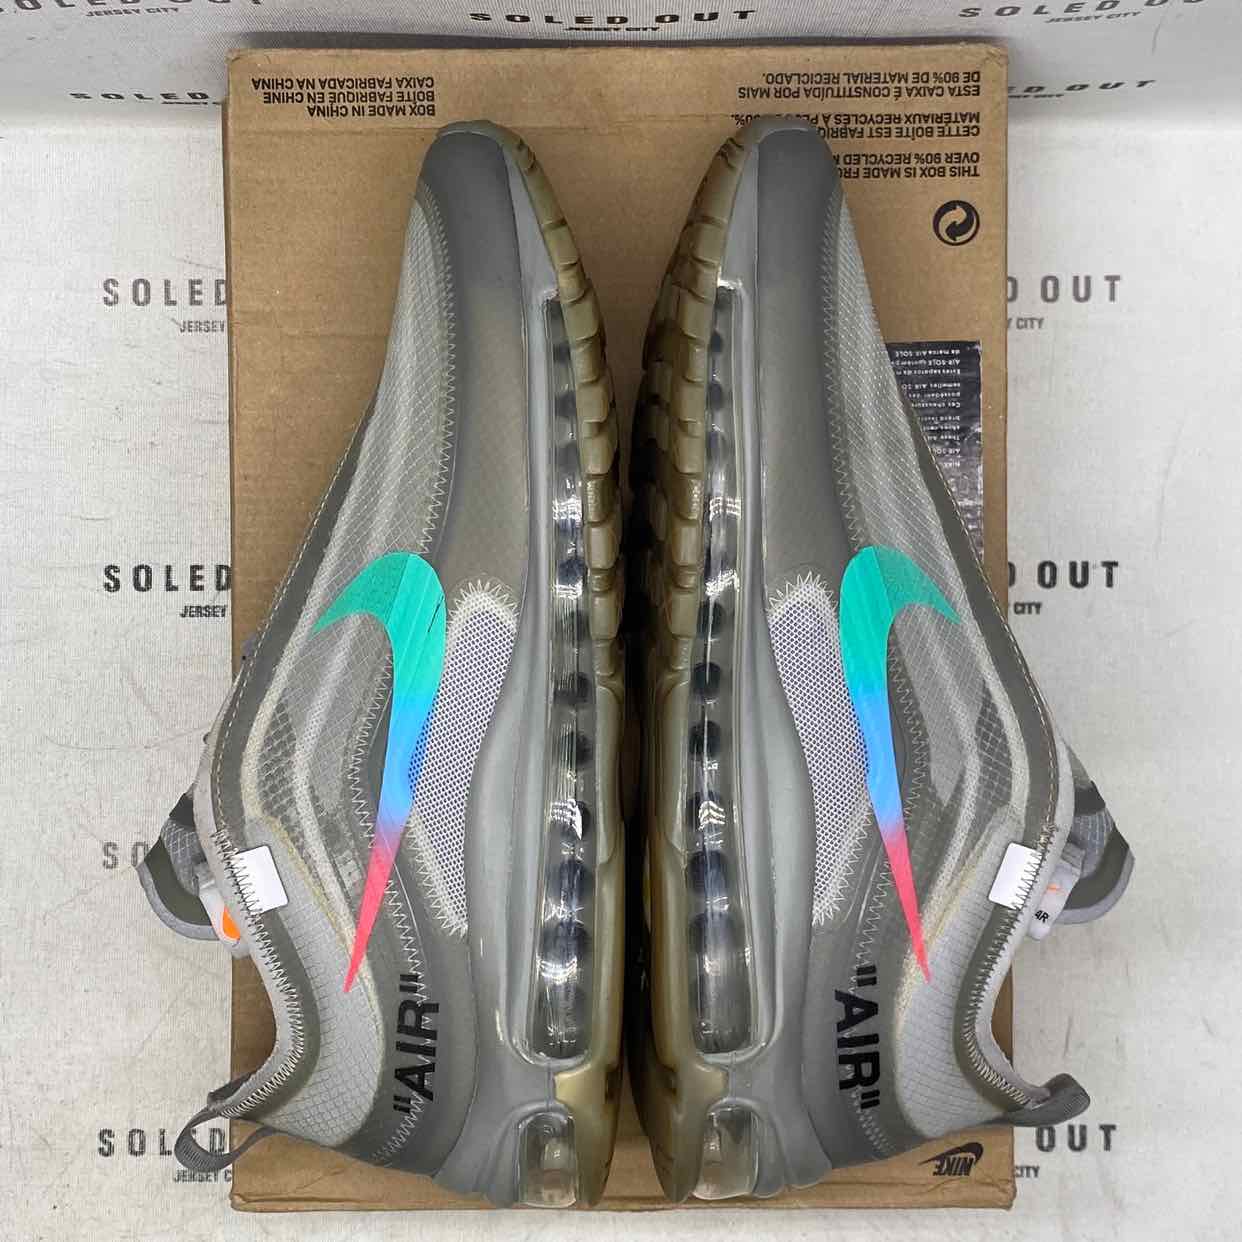 Nike Air Max 97 / OW &quot;Menta&quot; 2018 Used Size 9